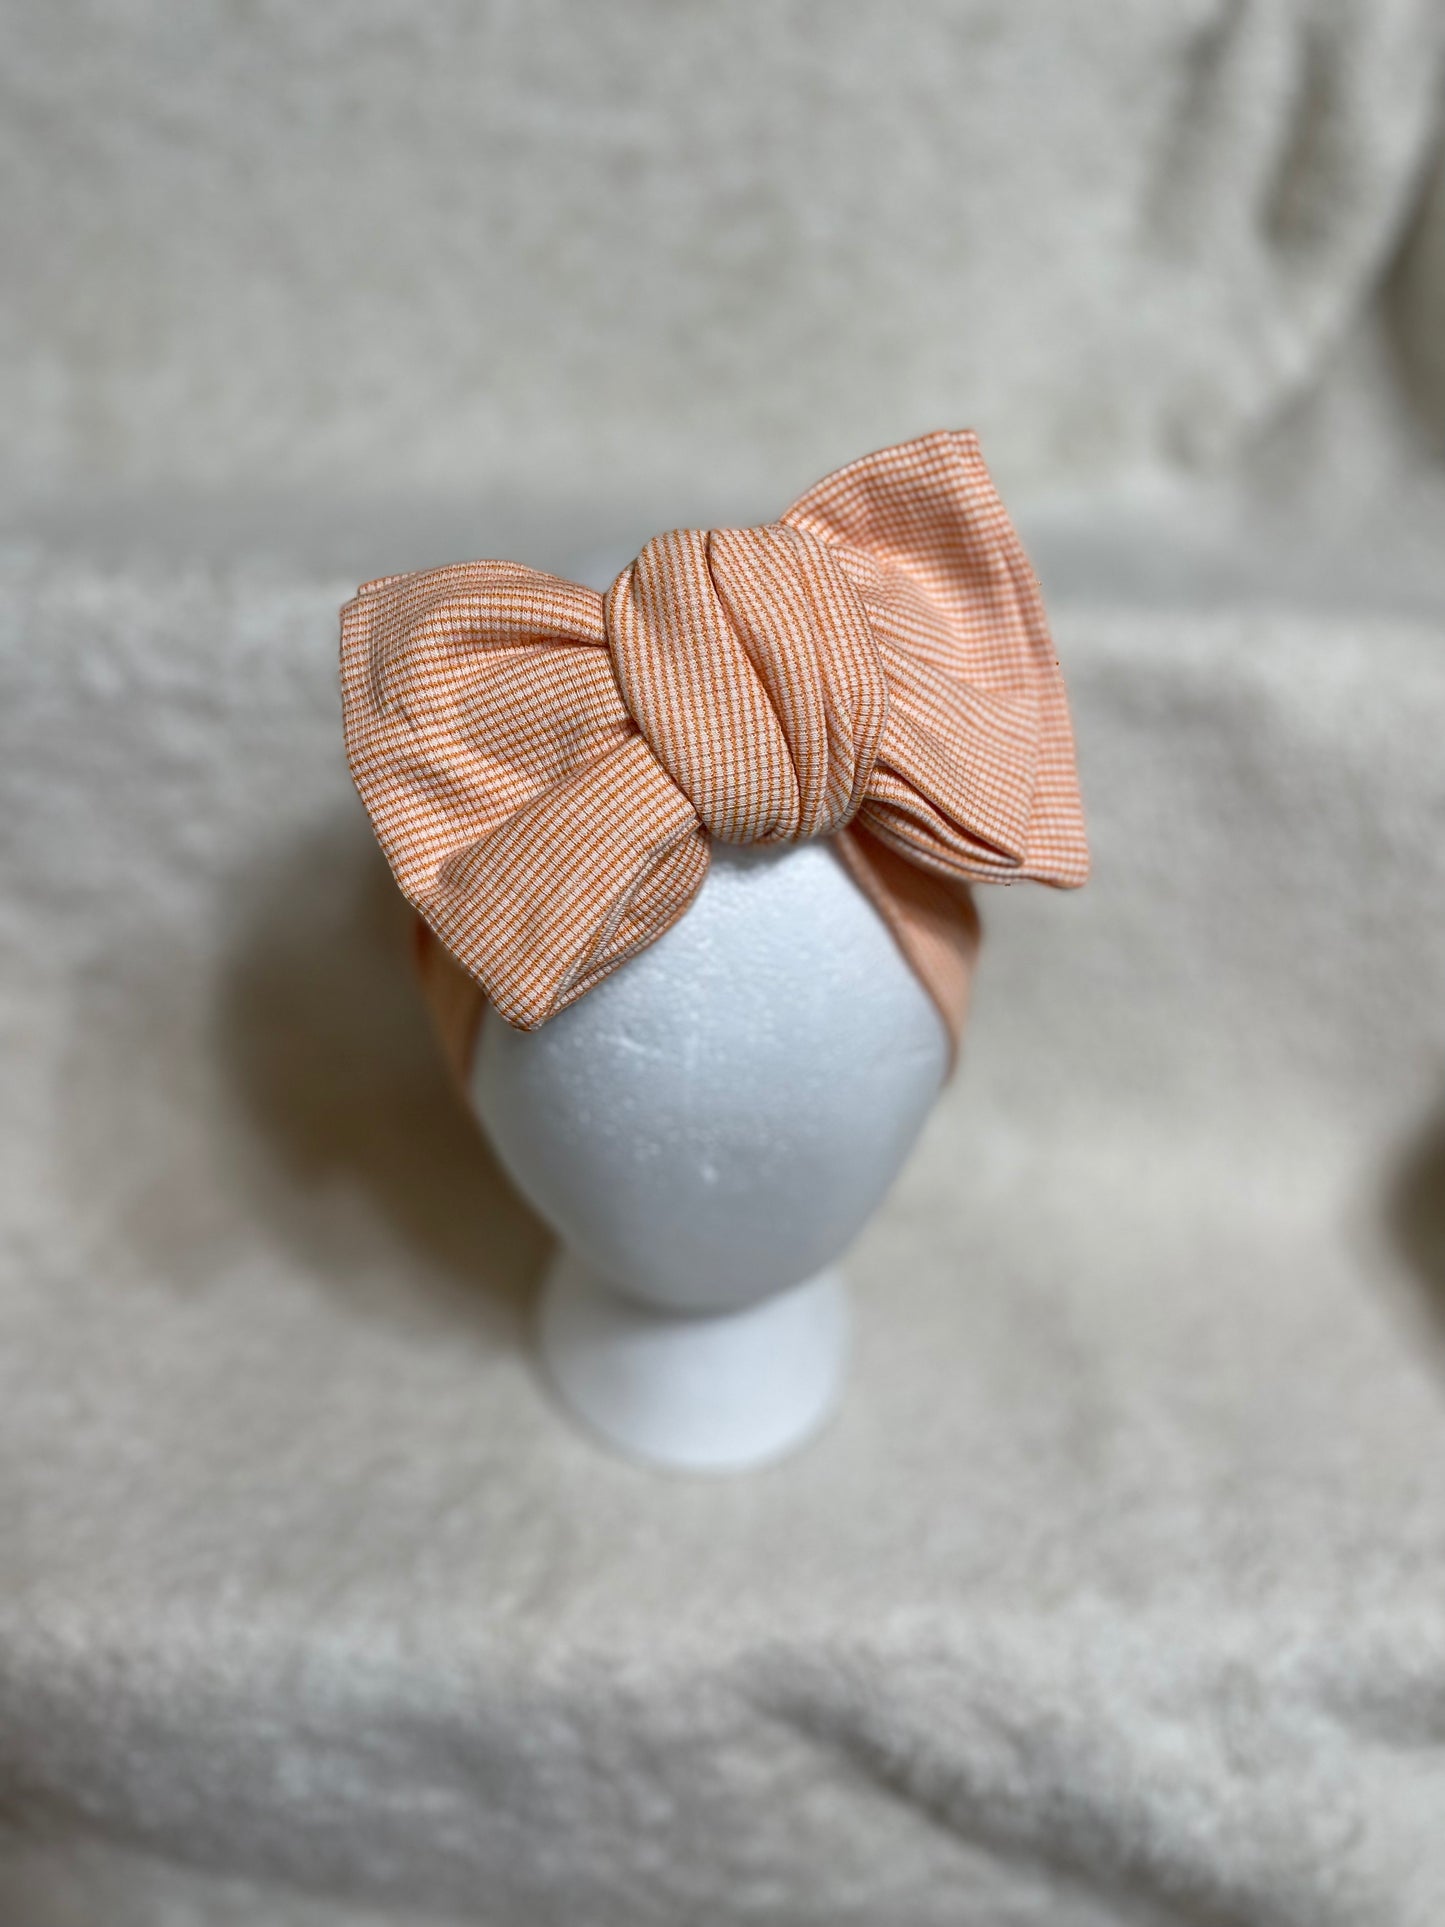 Oversized headwrap - Orange Stripes - Ev's Bowtique Shop Oversized headwraps are made to grow with your babies from newborn, infant to toddler as they are re-tieable/adjustable! Being made from soft stretchy fabric makes them the perfect essential for everyday wear or to make a statement✨ As always handle with care, your bows are delicate items!